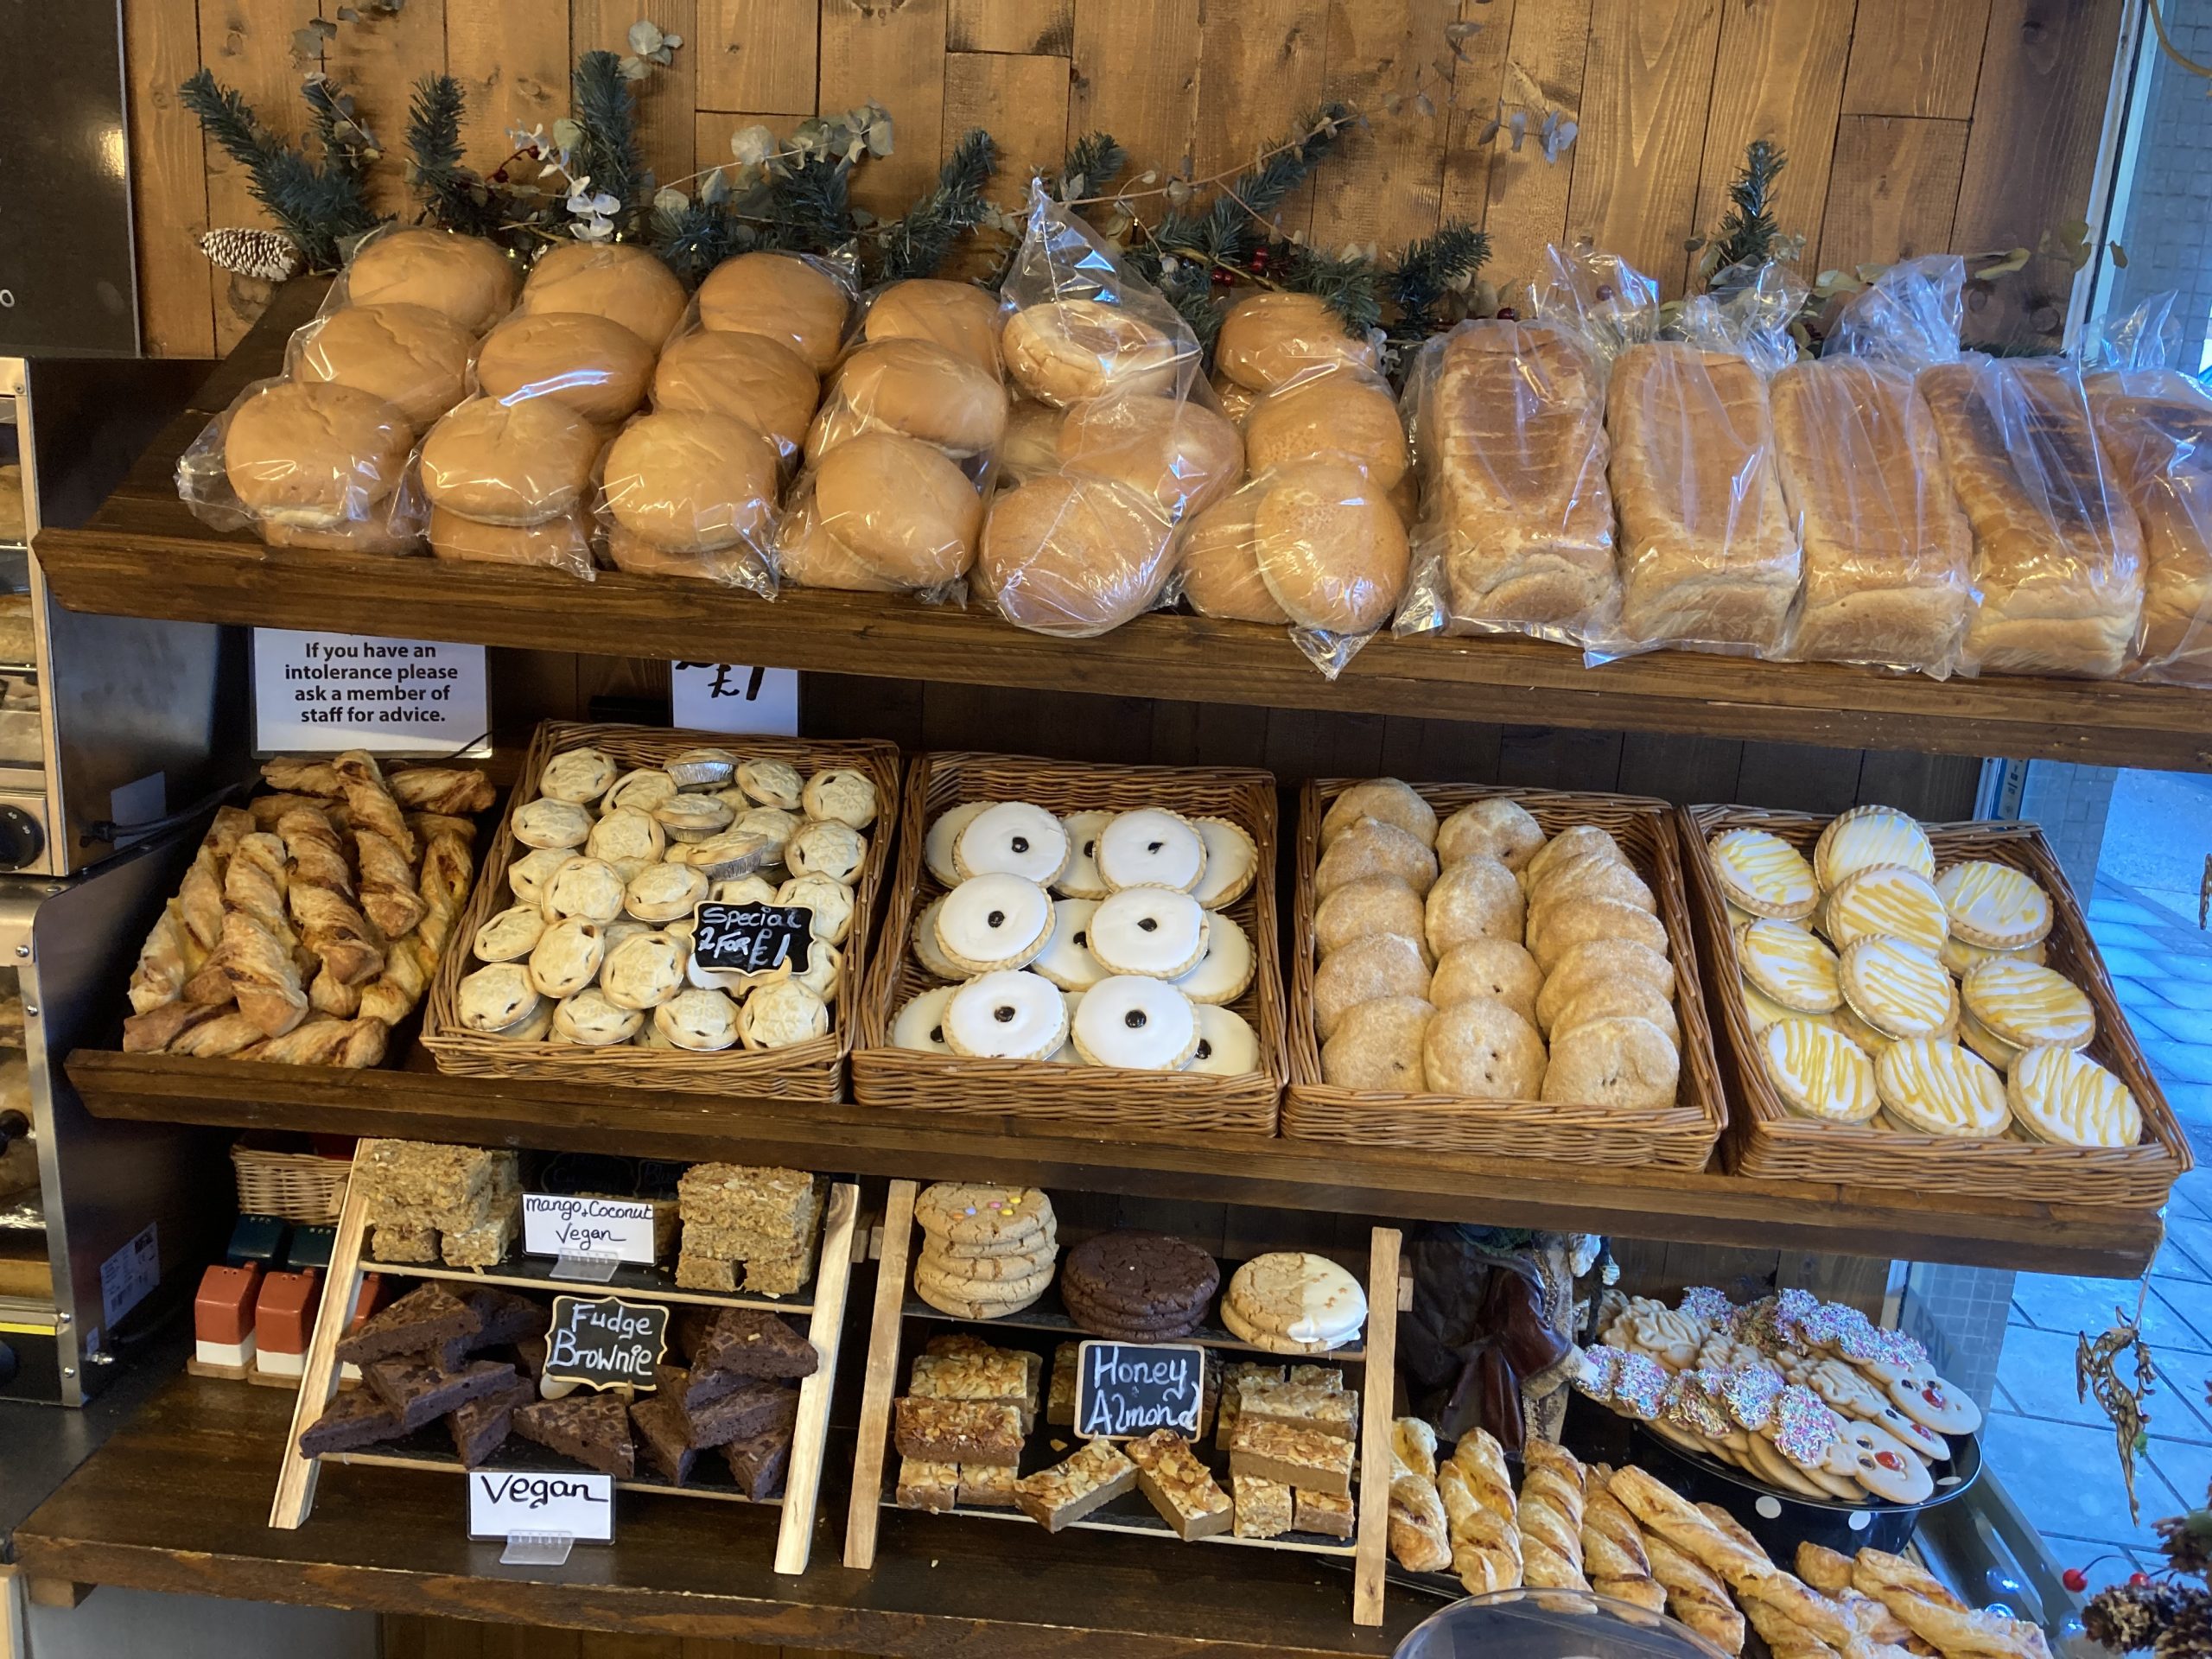 Large Selections of Breads, Rolls and cakes - by Sandwichinthesquare.co.uk